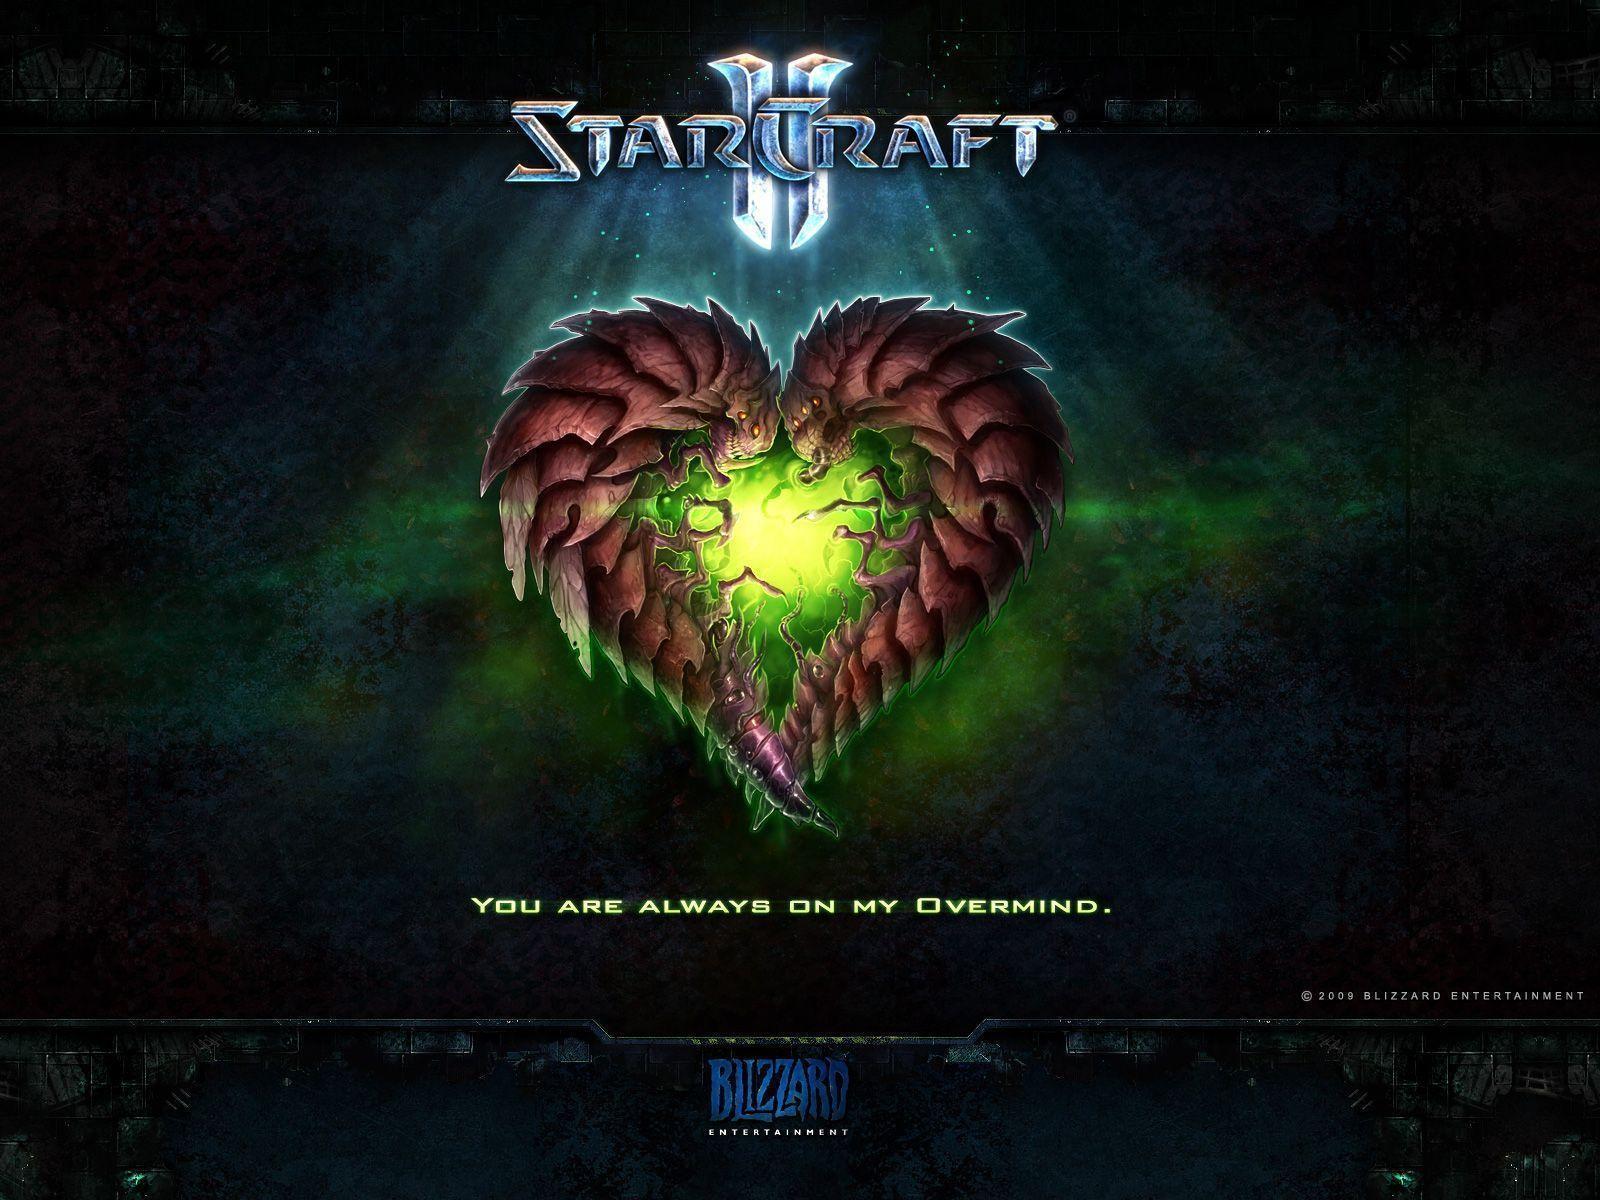 eSports News: Valentine: From Blizzard with love